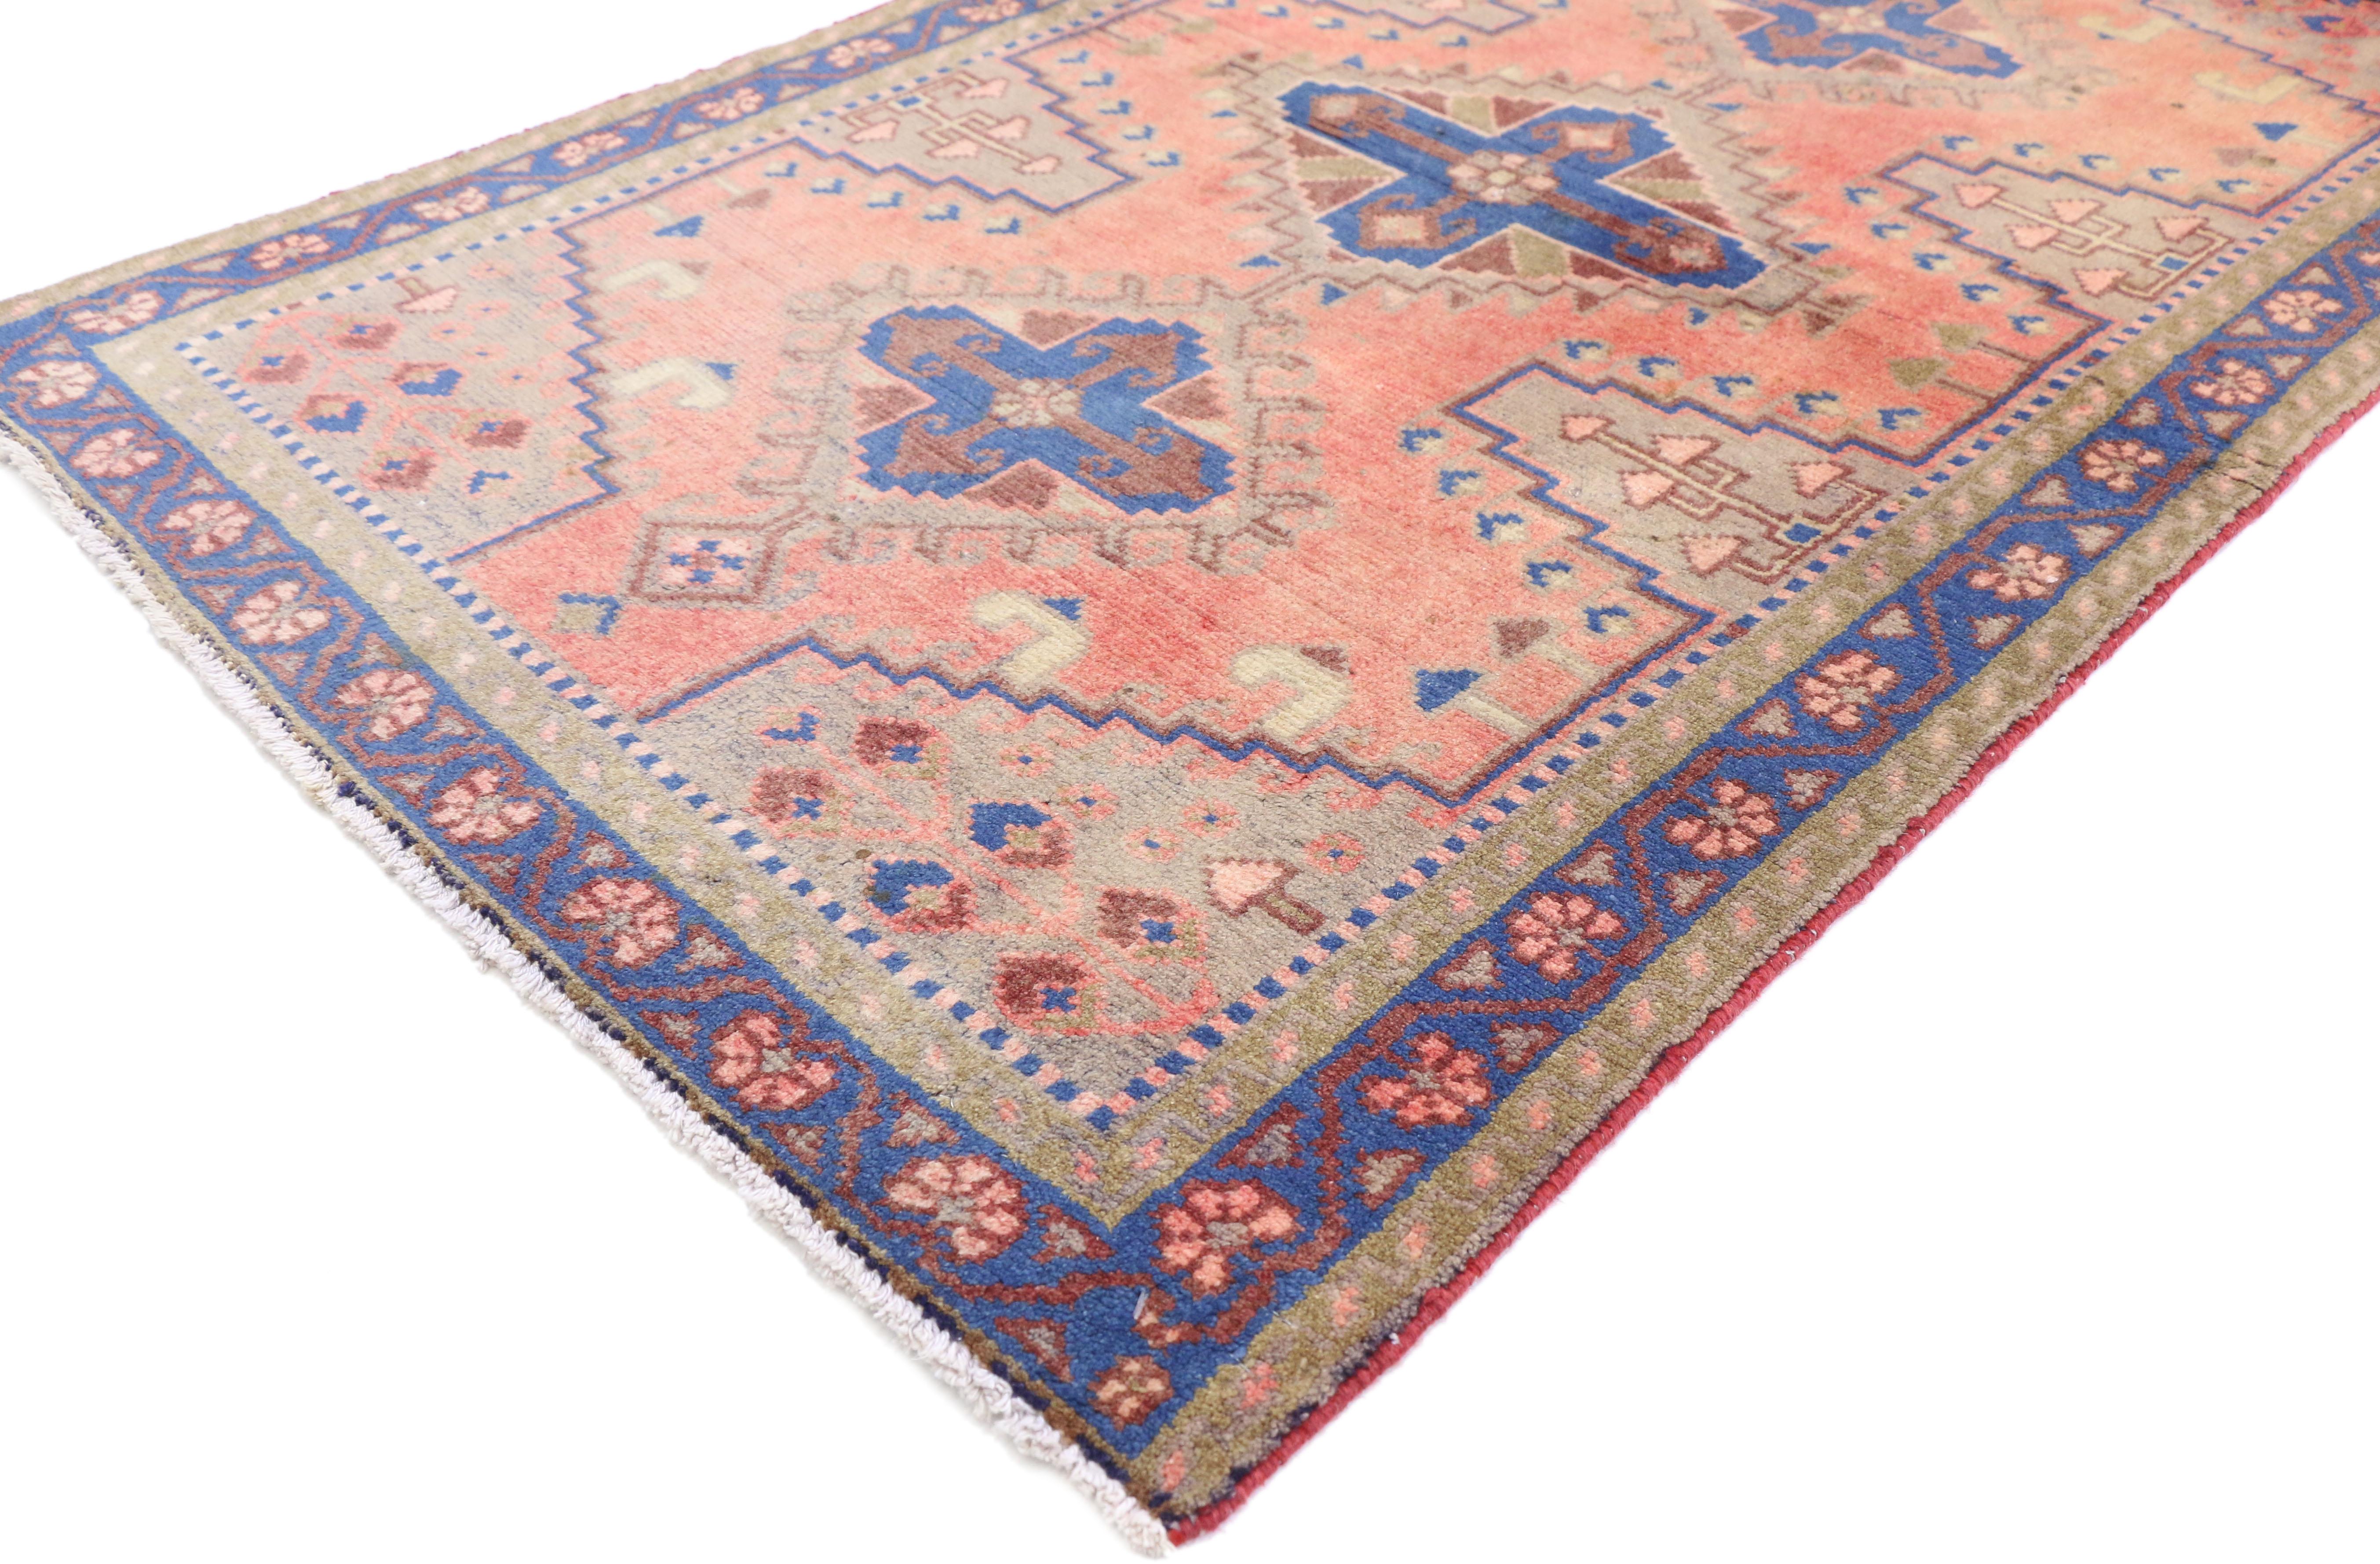 75989 vintage Persian Viss Accent rug with Eclectic Bohemian Tribal style. This hand knotted wool vintage Persian Viss accent rug features three latch-hook amulets each filled with a cruciform cross motif. Two stepped ziggurat pyramid mounds on each